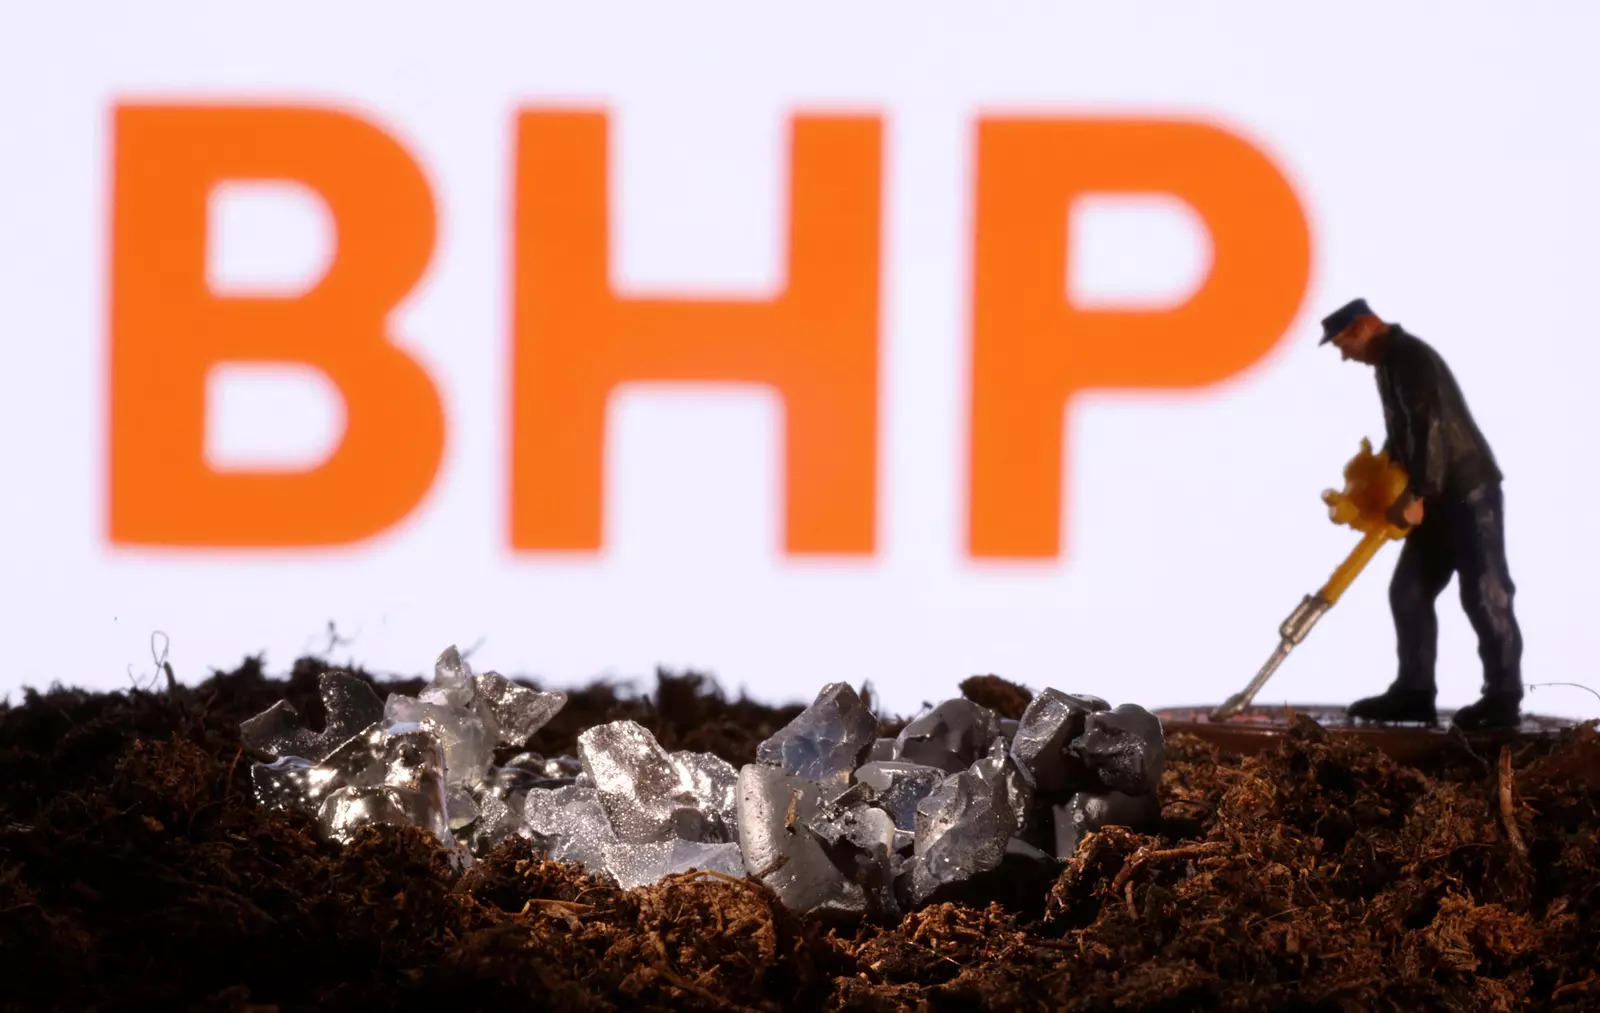  FILE PHOTO: A small toy figure and mineral imitation are seen in front of the BHP logo in this illustration taken November 19, 2021. REUTERS/Dado Ruvic/Illustration/File Photo